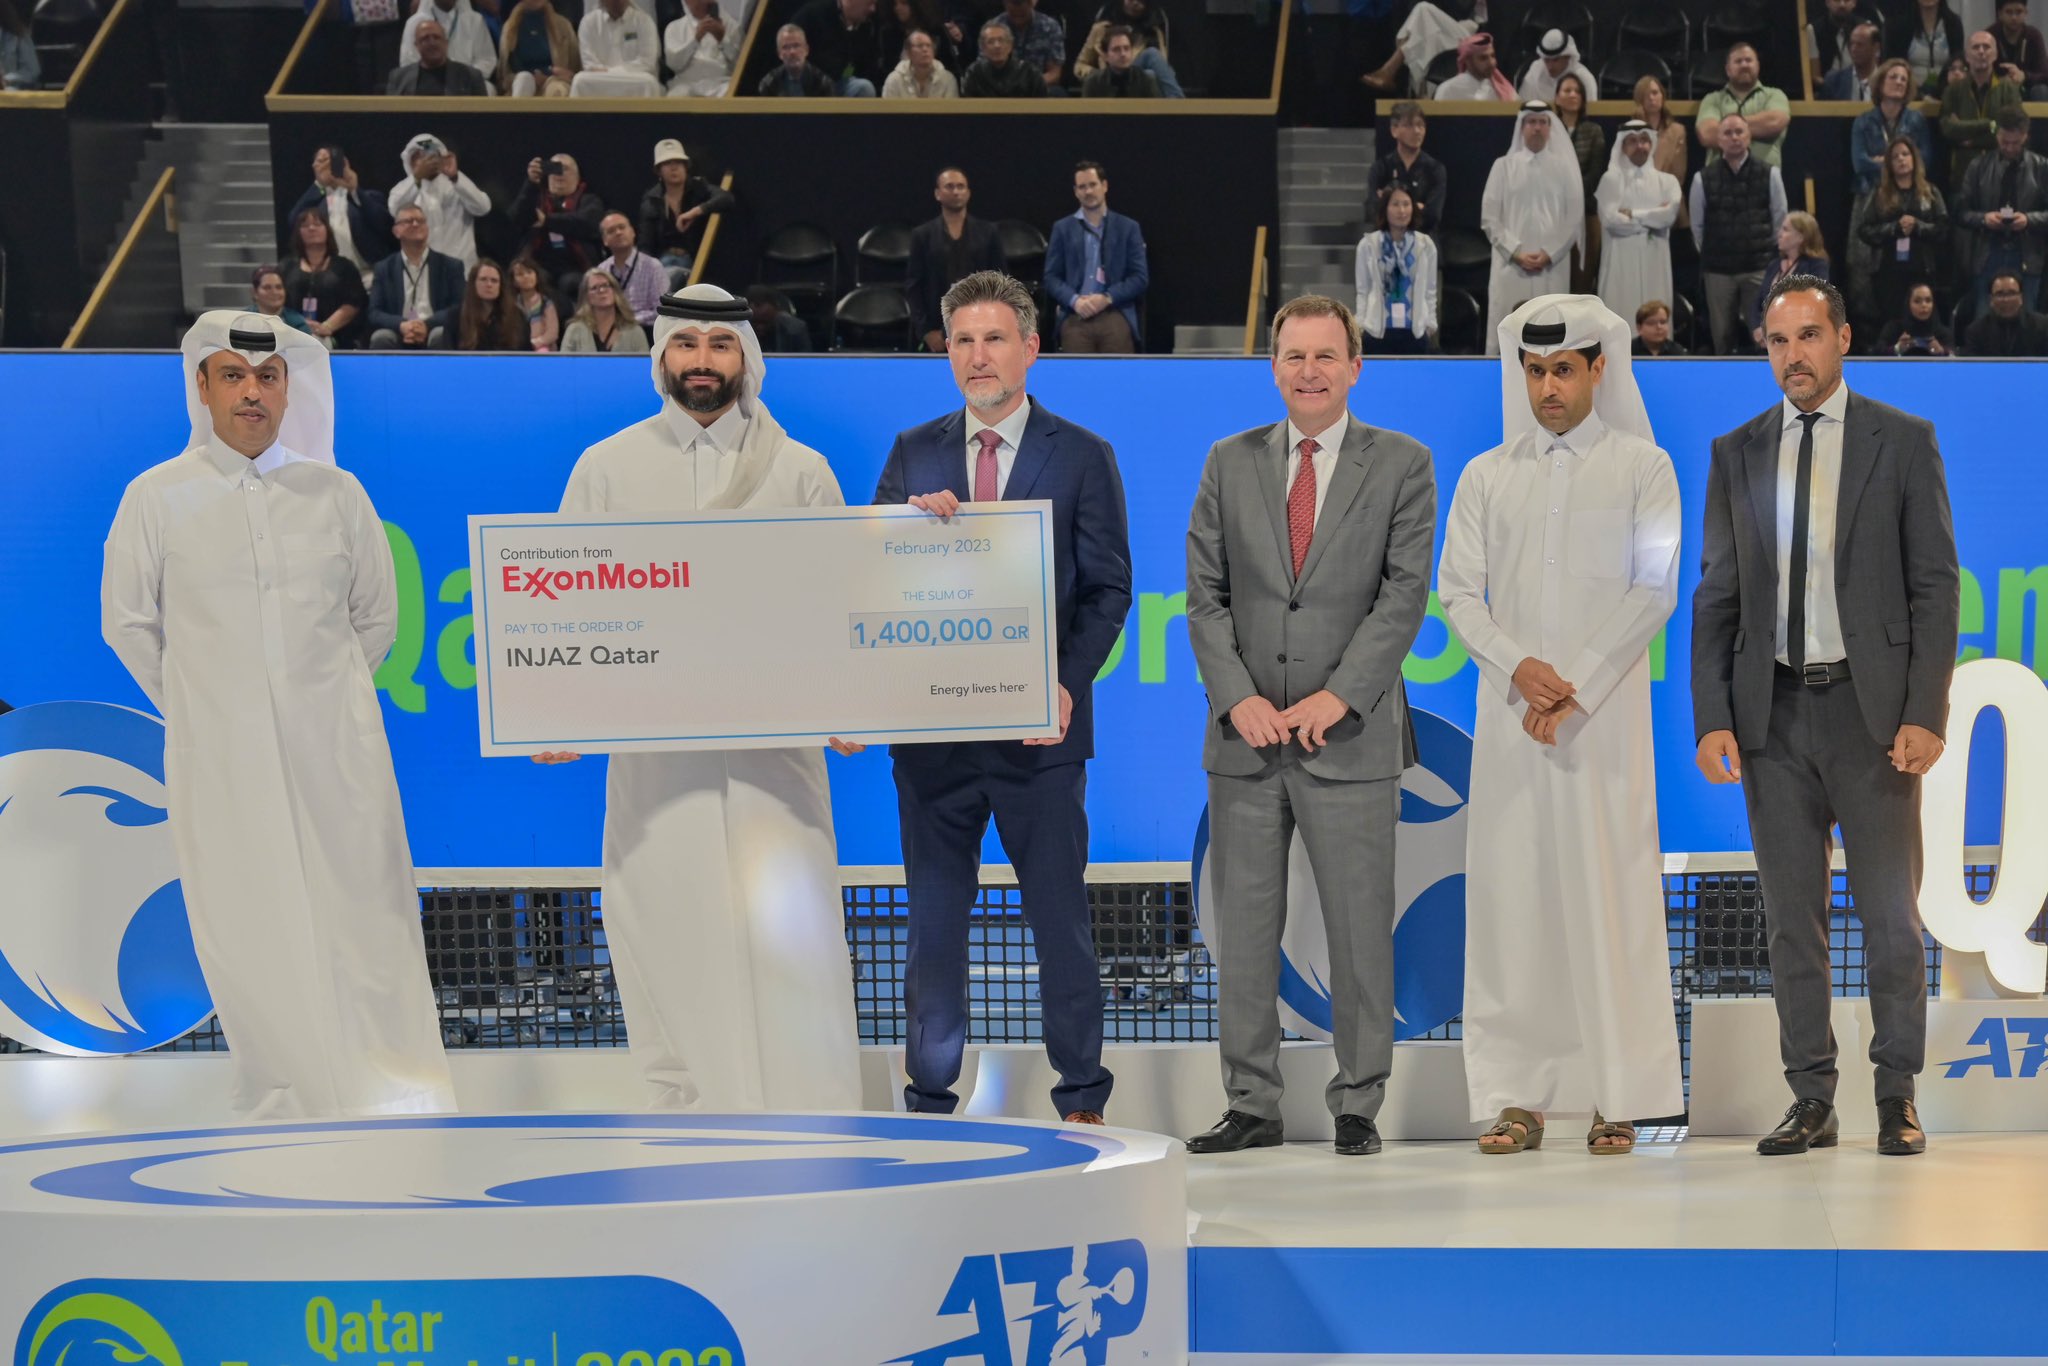 2023 Qatar ExxonMobil Open Prize Money and points breakdown with $1,377,025  on offer